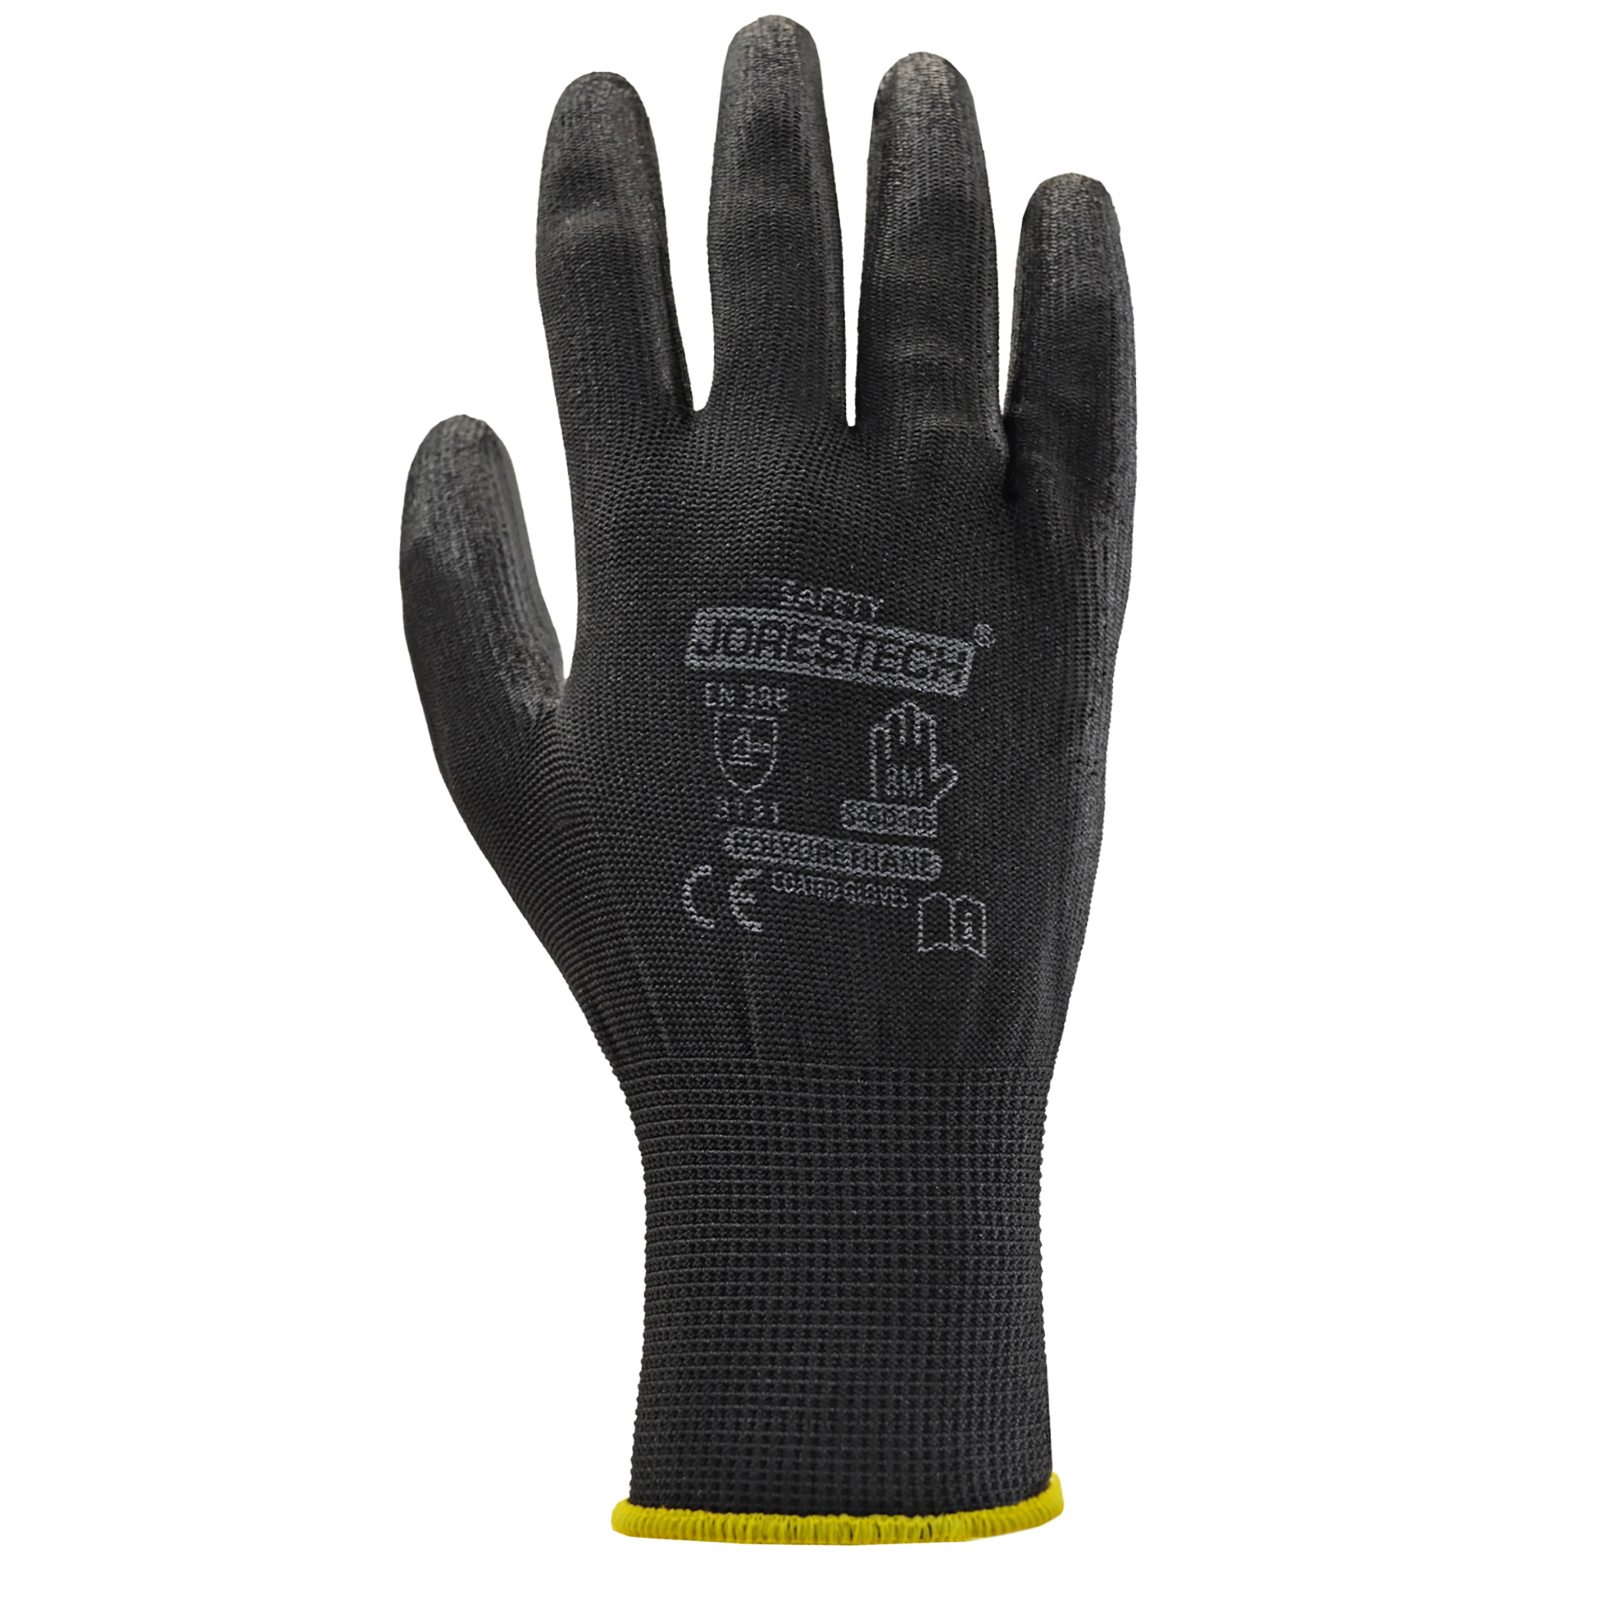 Thin Safety Work Gloves with Polyurethane Dipped Palms – Pack of 12